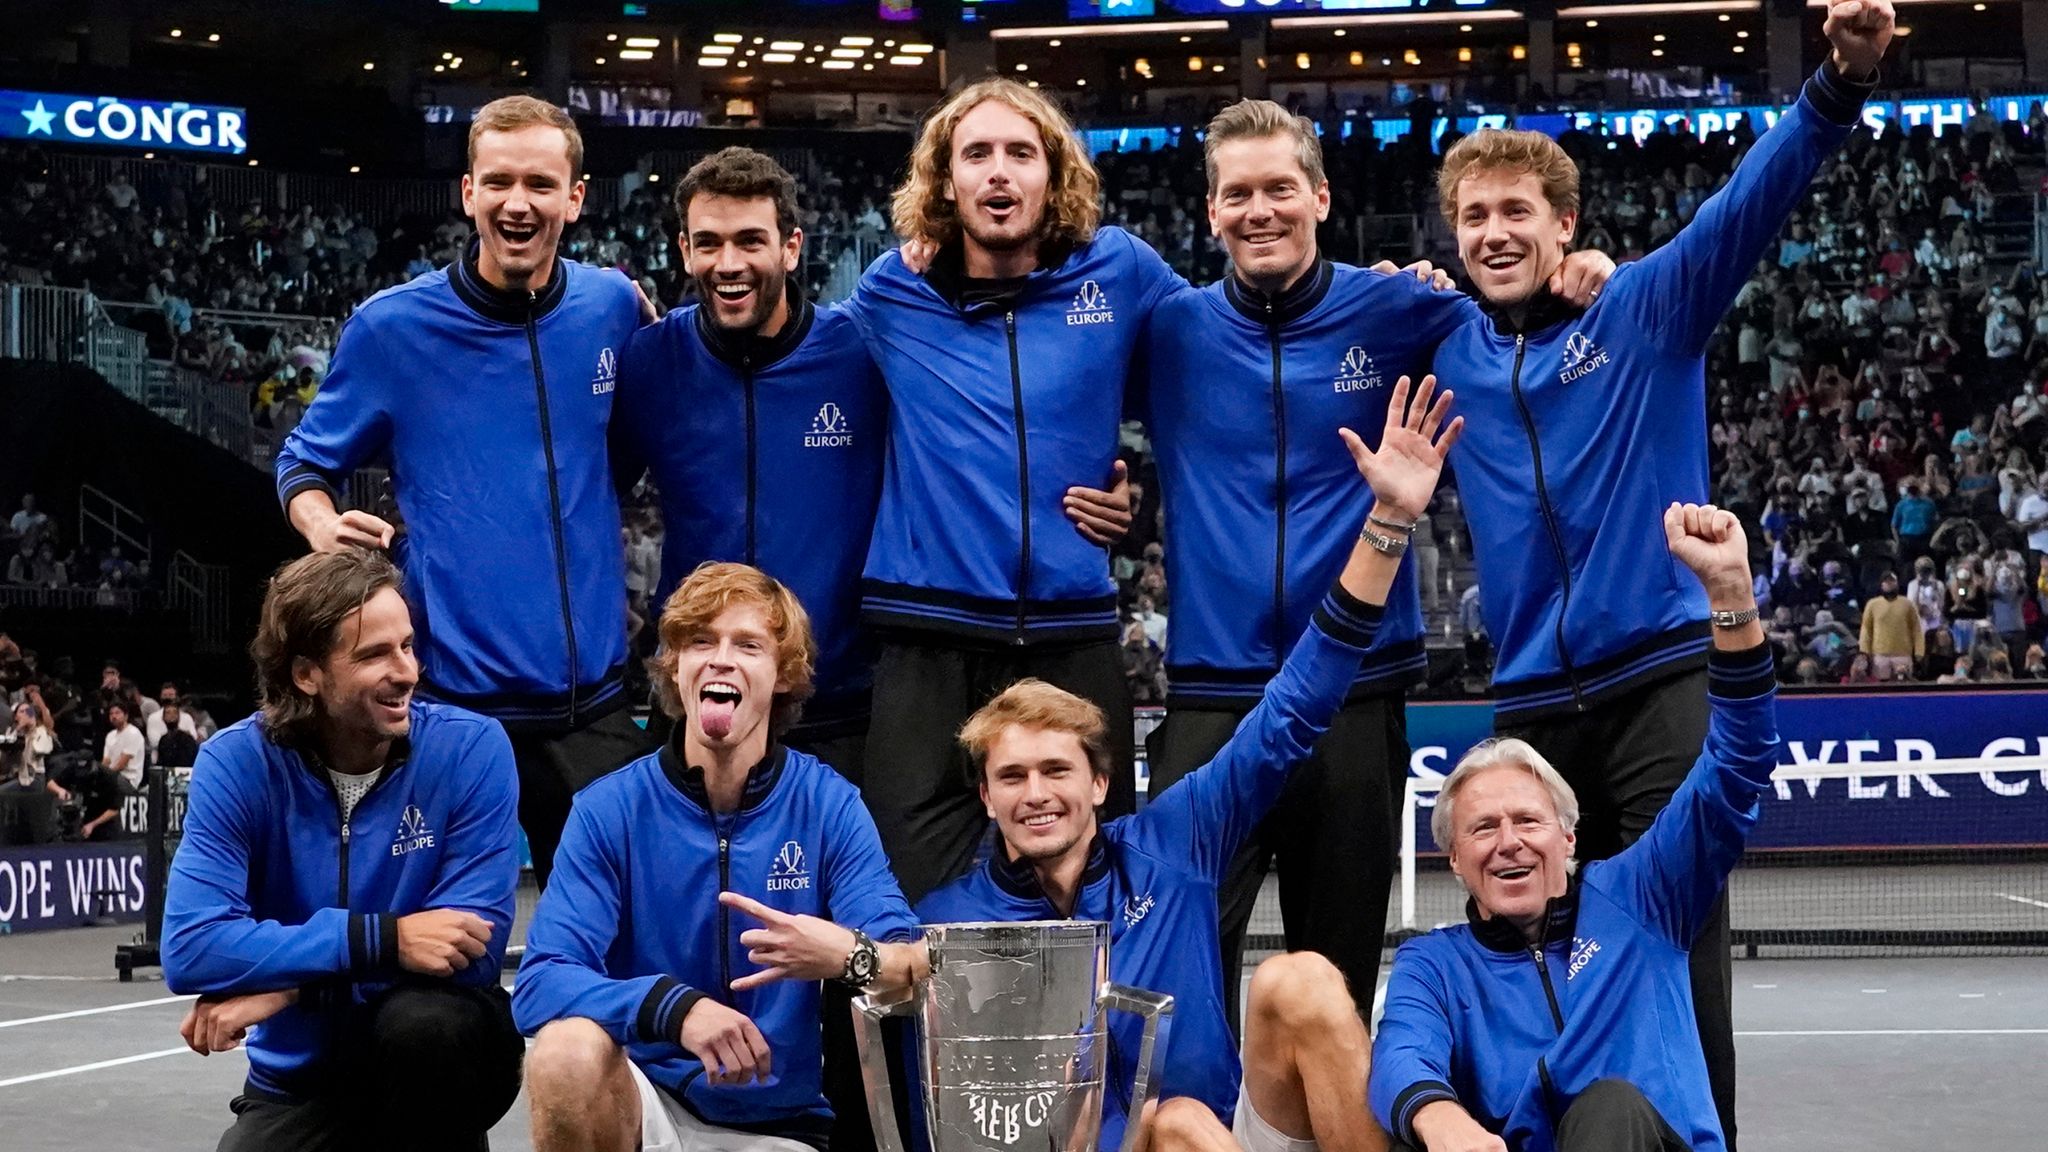 Laver Cup 2022: Participants, TV & Livestream, mode, schedule – everything about Federer’s farewell